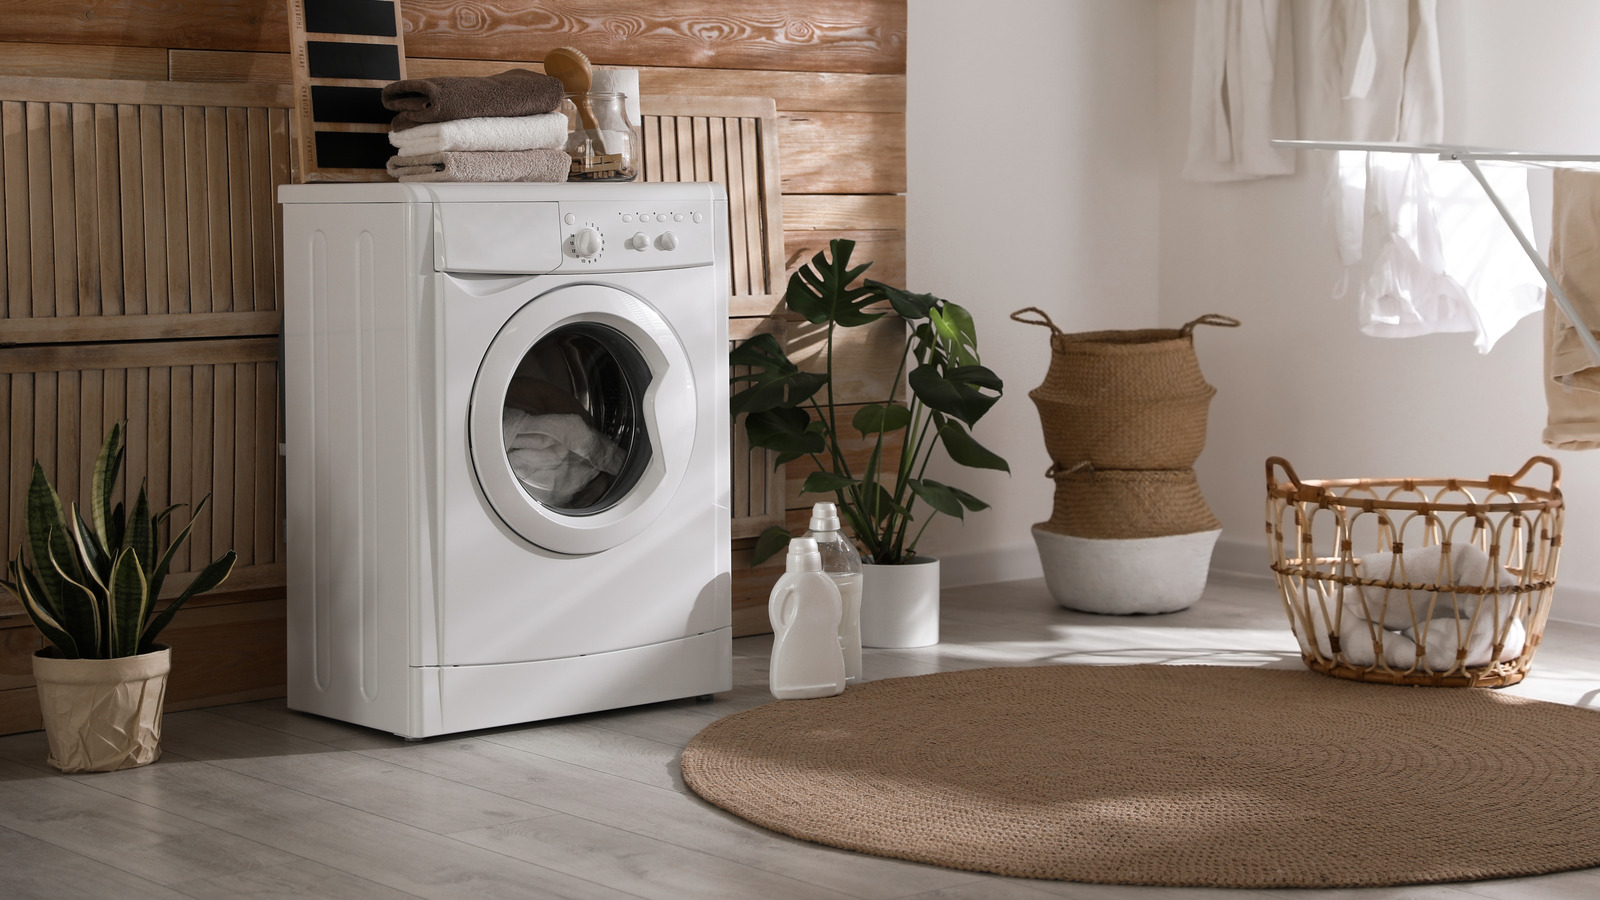 Home Depot Or Lowe's: Which Has Better Deals On Washing Machines?